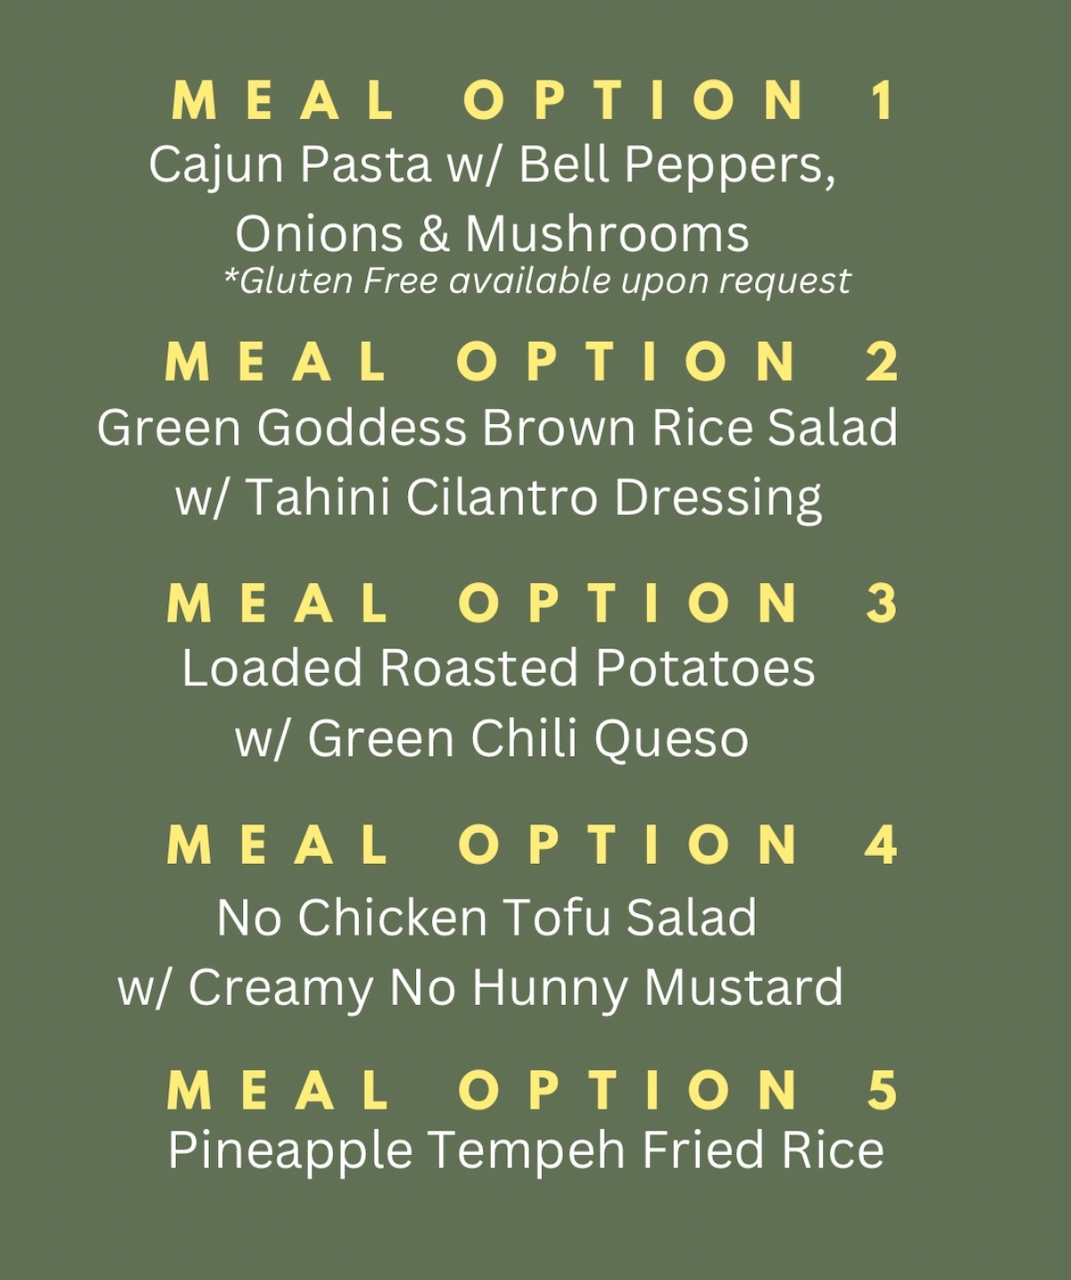 THB meal options